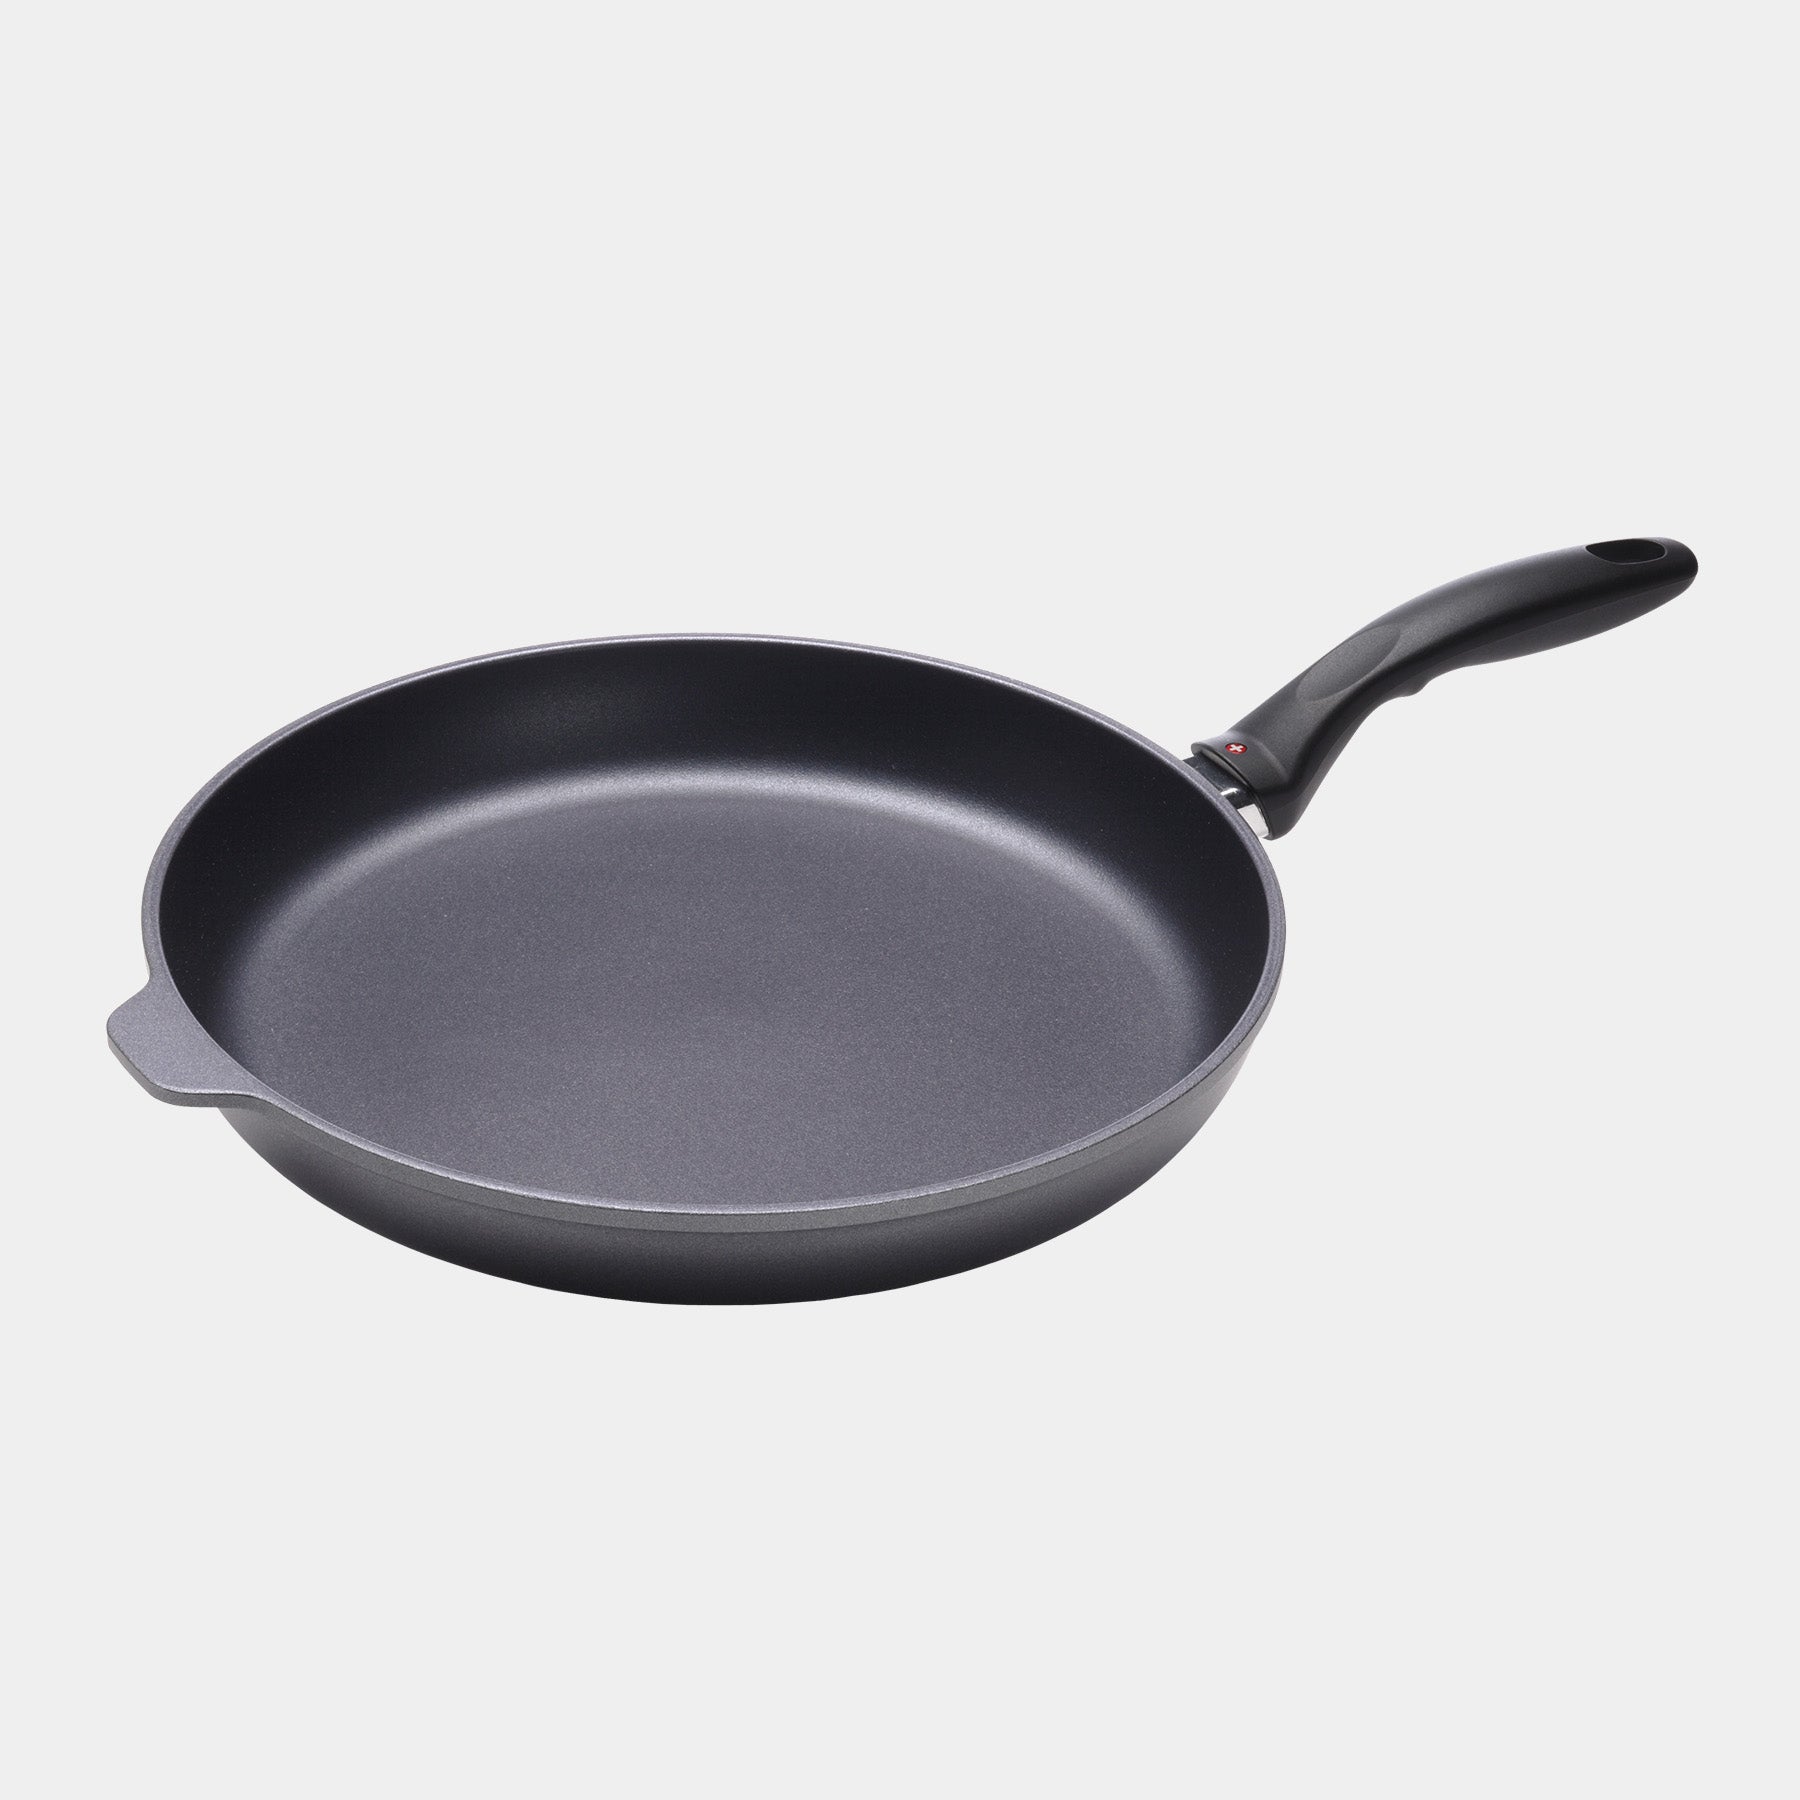 HD Nonstick 12.5" Fry Pan - Induction